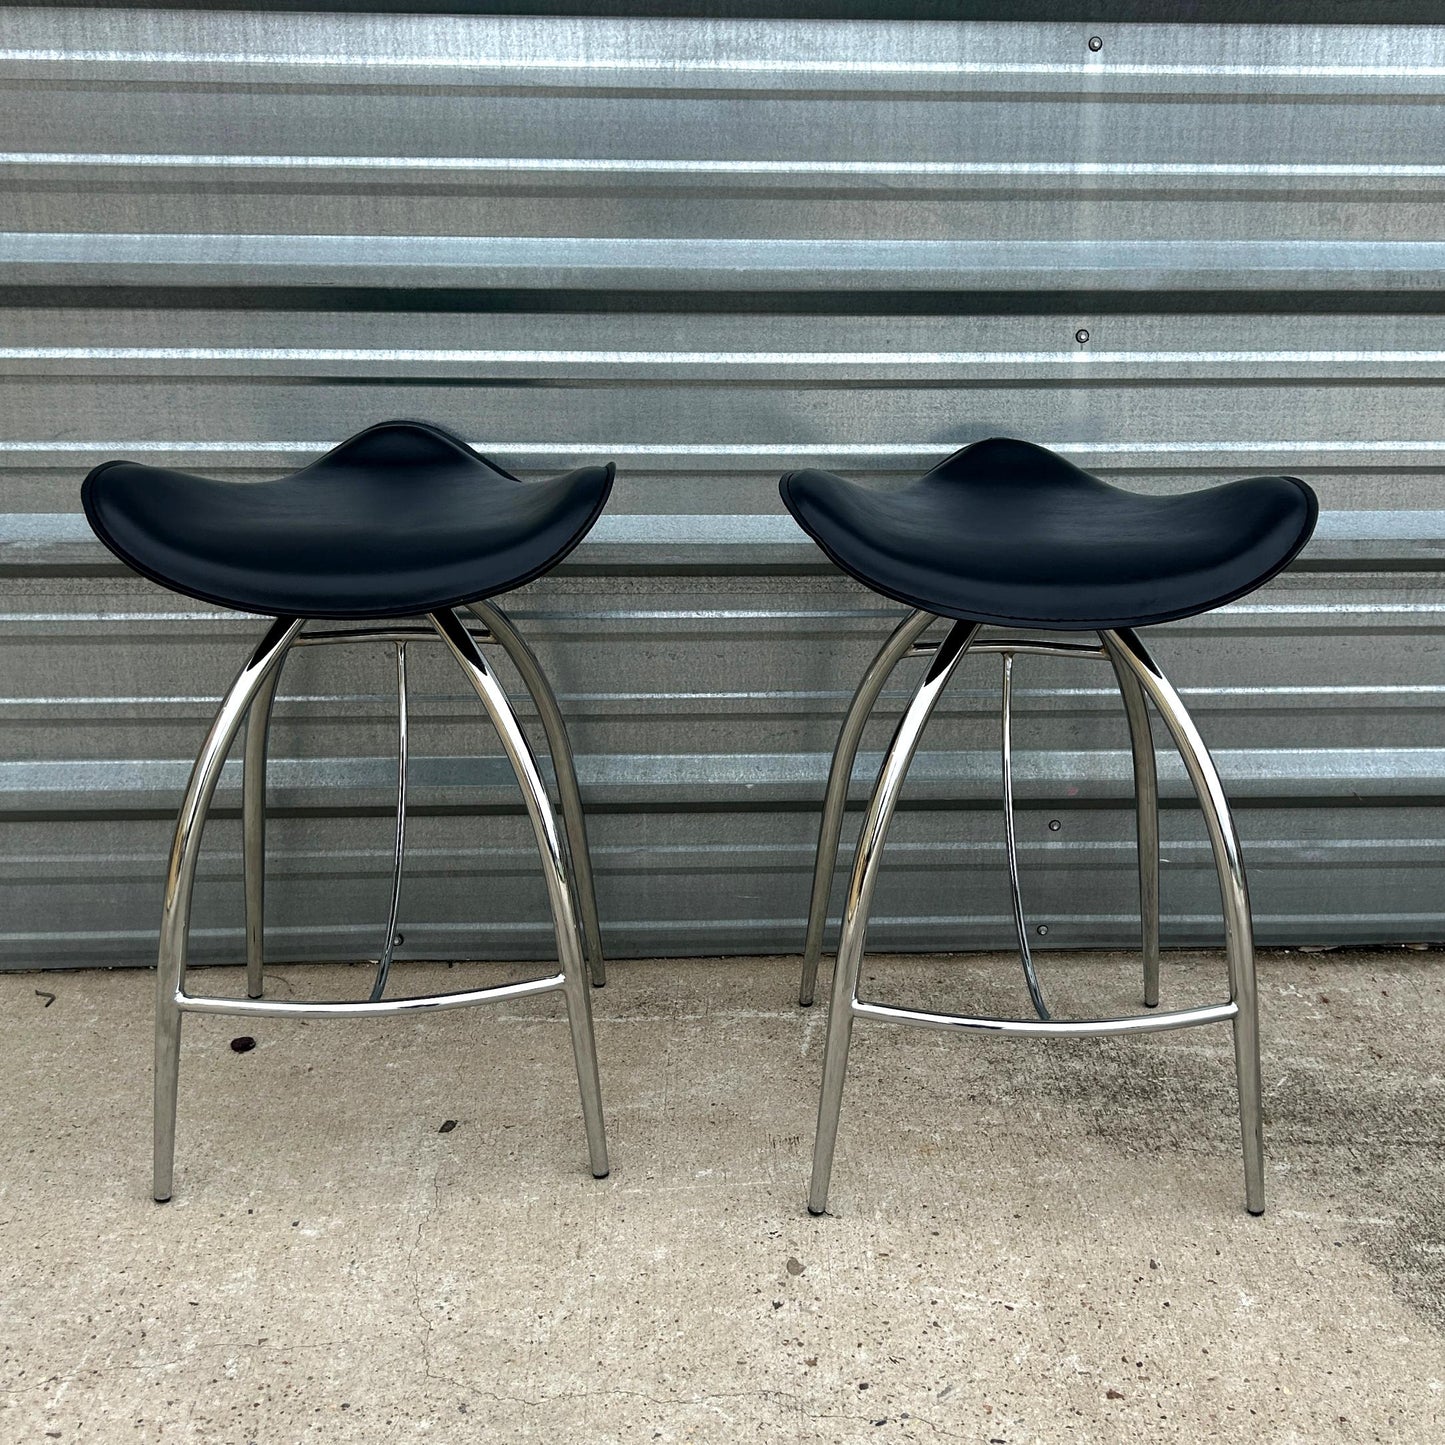 Pair of Leather and Chrome Stools